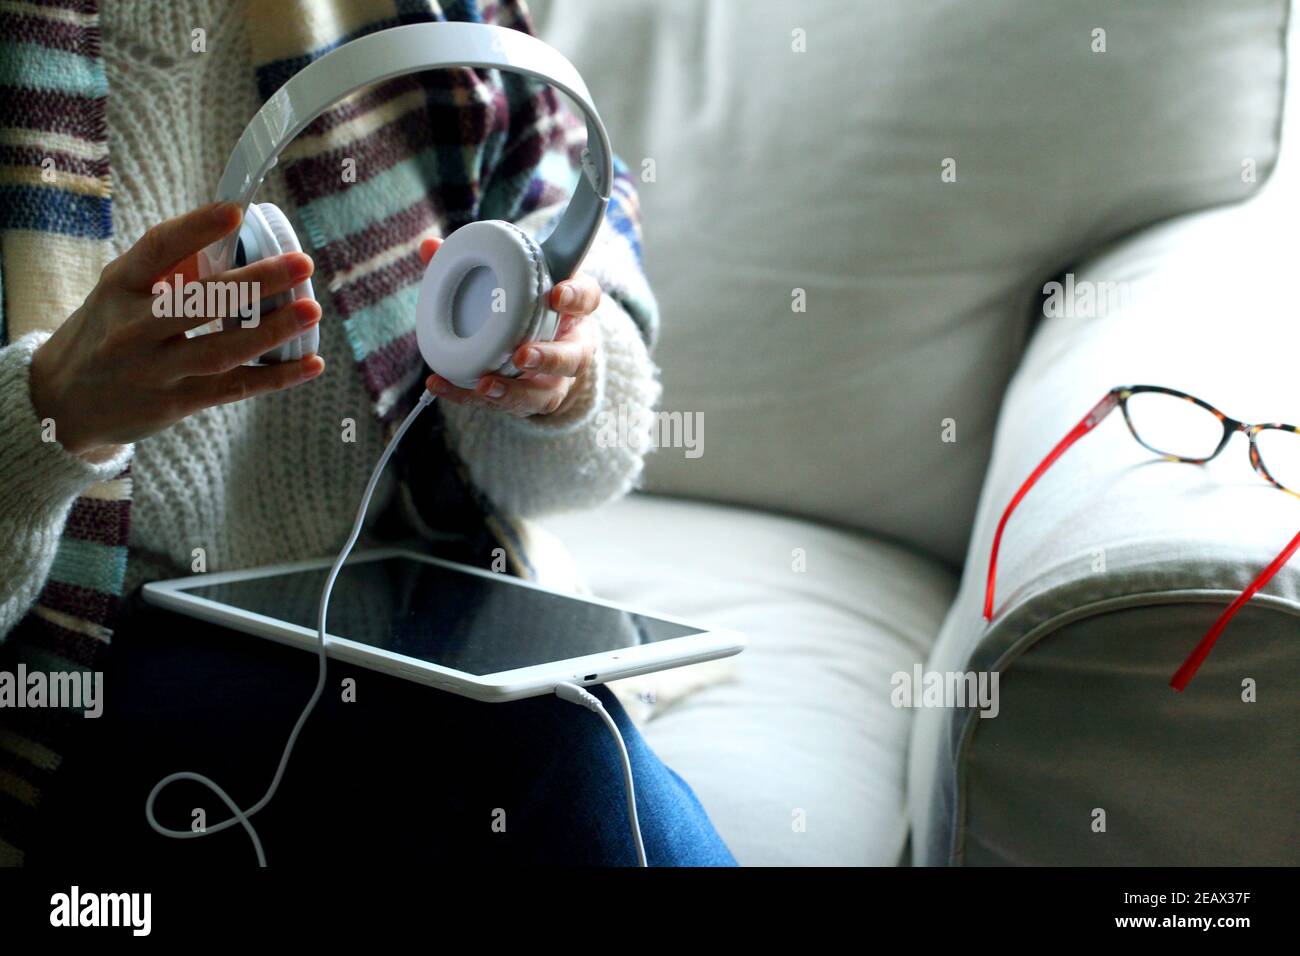 Closeup shot of a woman sitting on the couch holding a tablet and headphones Stock Photo